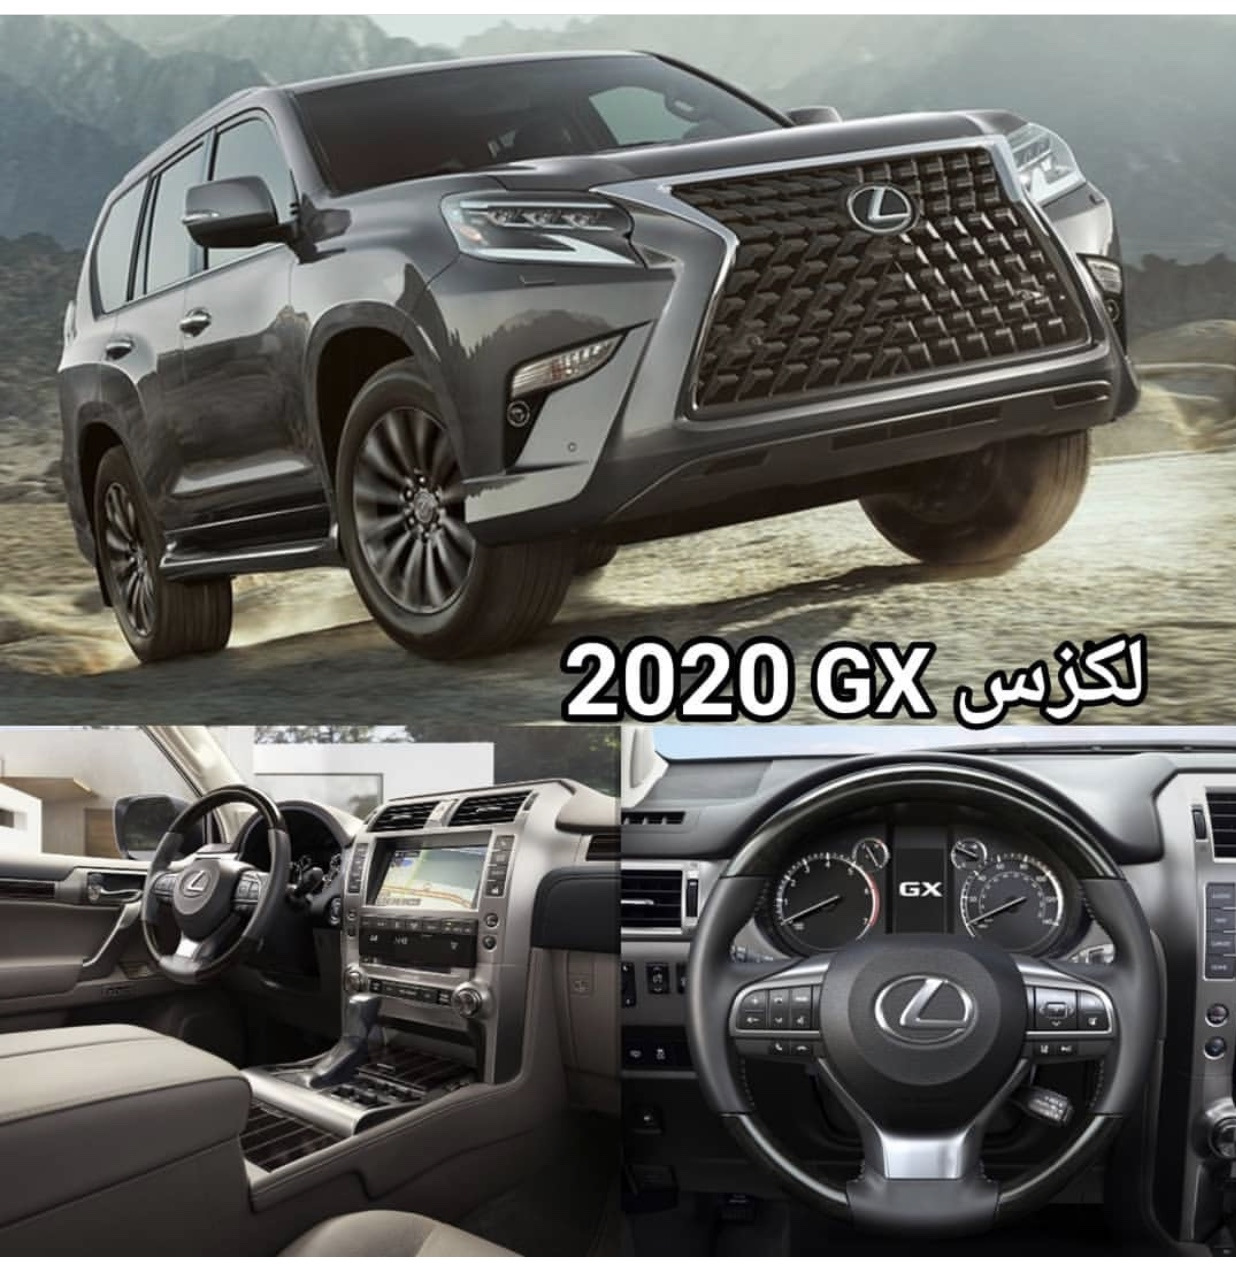 Gx460 2020 2020 Lexus Gx 460 Redesign And The New